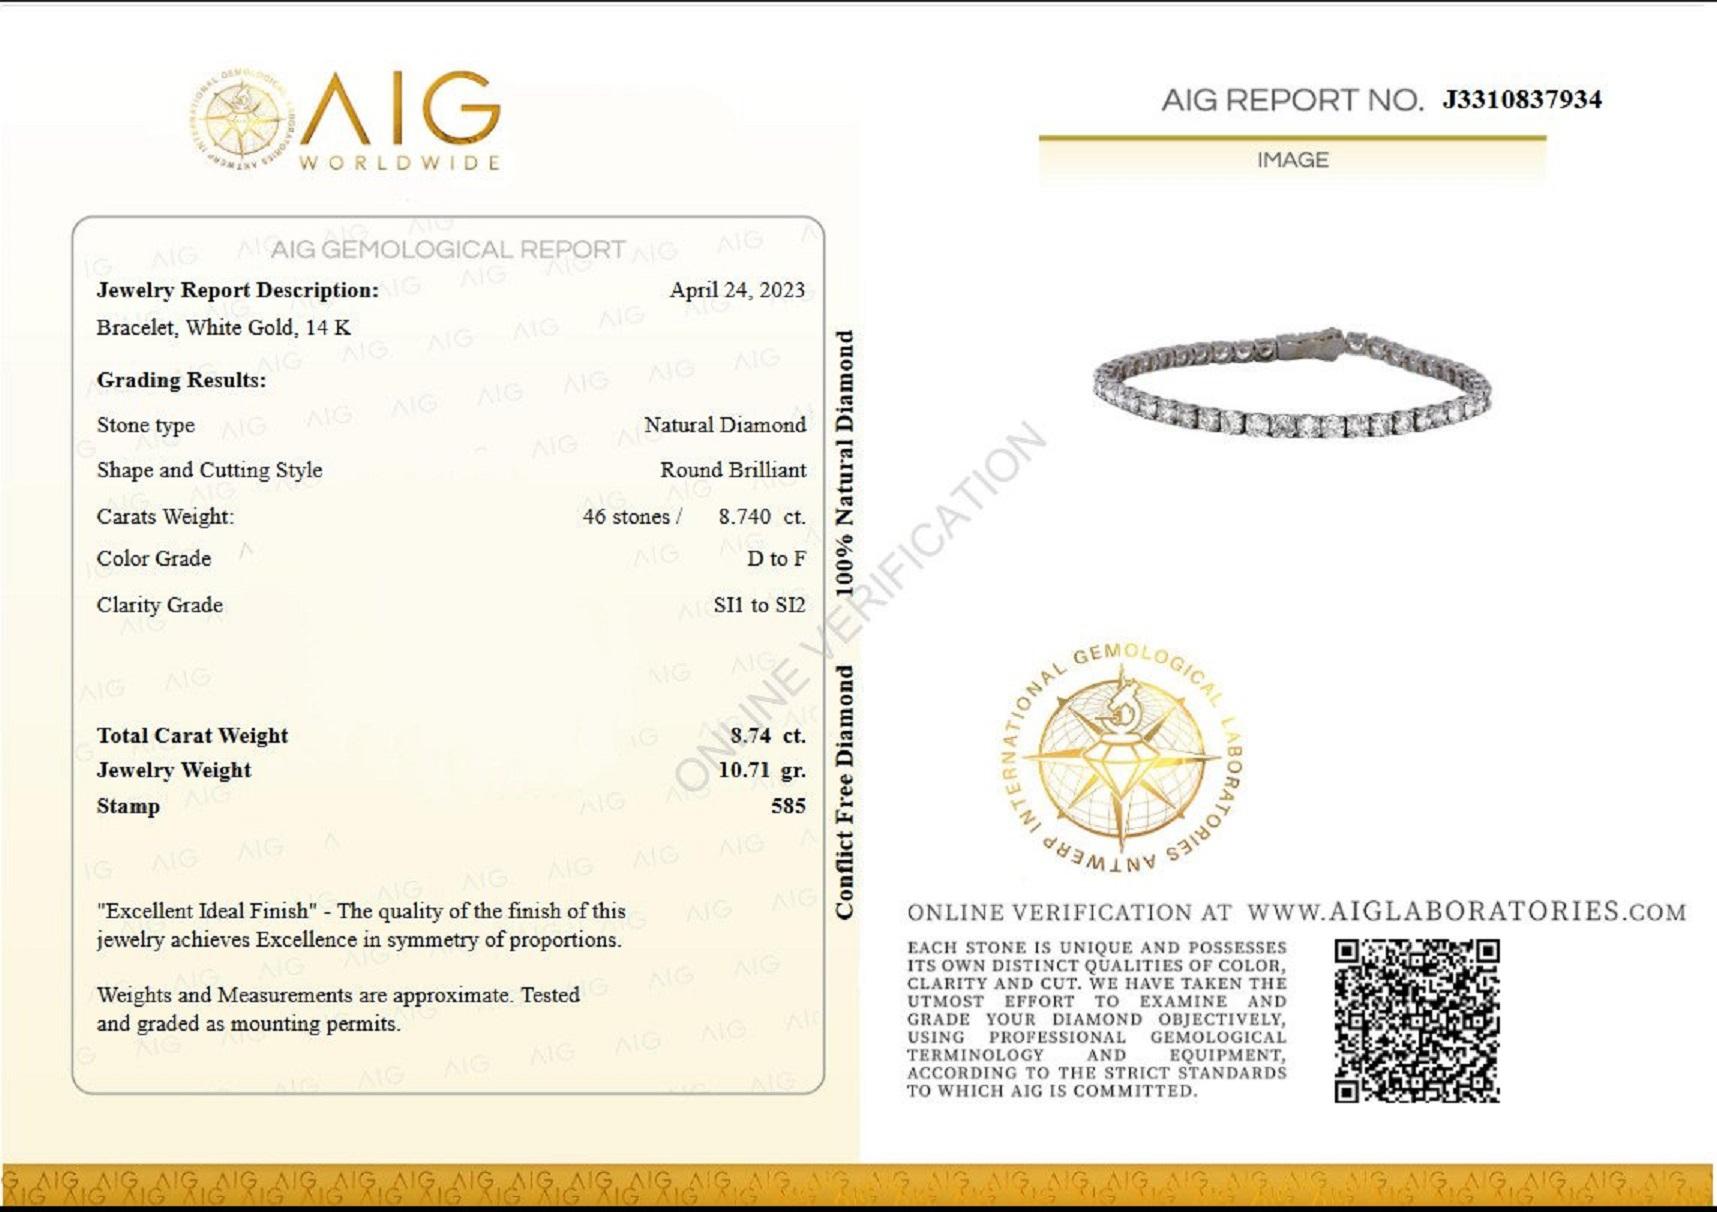 ** In Hong Kong and the USA the VAT is 0%.
___________
Natural Diamonds
Cut: Round Brilliant
Carat: 8.74 cttw / 46 stones
Color: D to F
Clarity: SI1 to SI2

Item ships from Israeli Diamonds Exchange, customers are responsible for any local customs